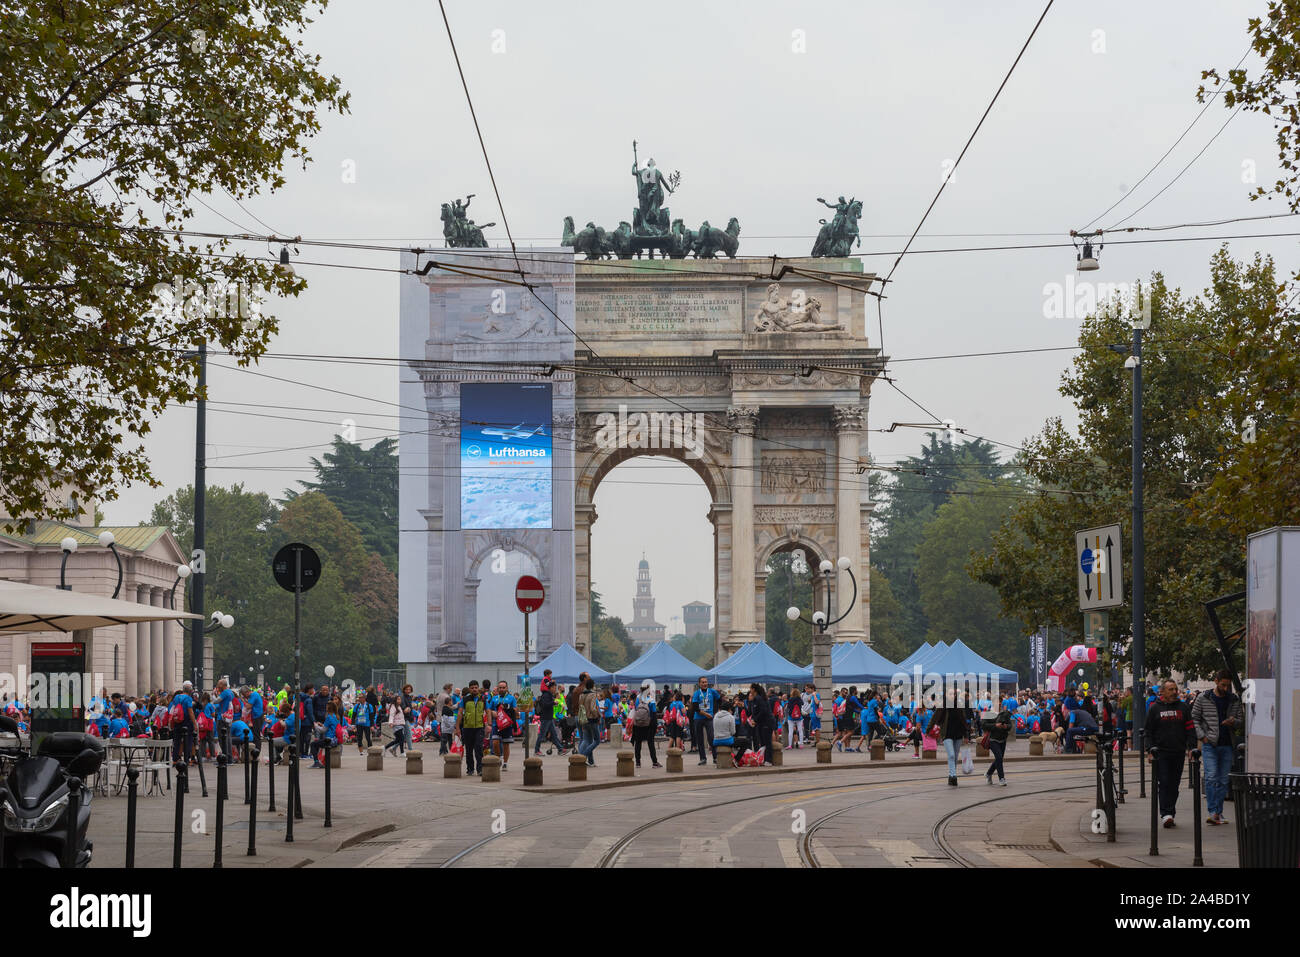 MILAN, ITALY - OCTOBER 13 2019: Athletes celebrate the end of the Deejay Ten at the Arco della Pace, a running event organized by Deejay Radio for the Stock Photo